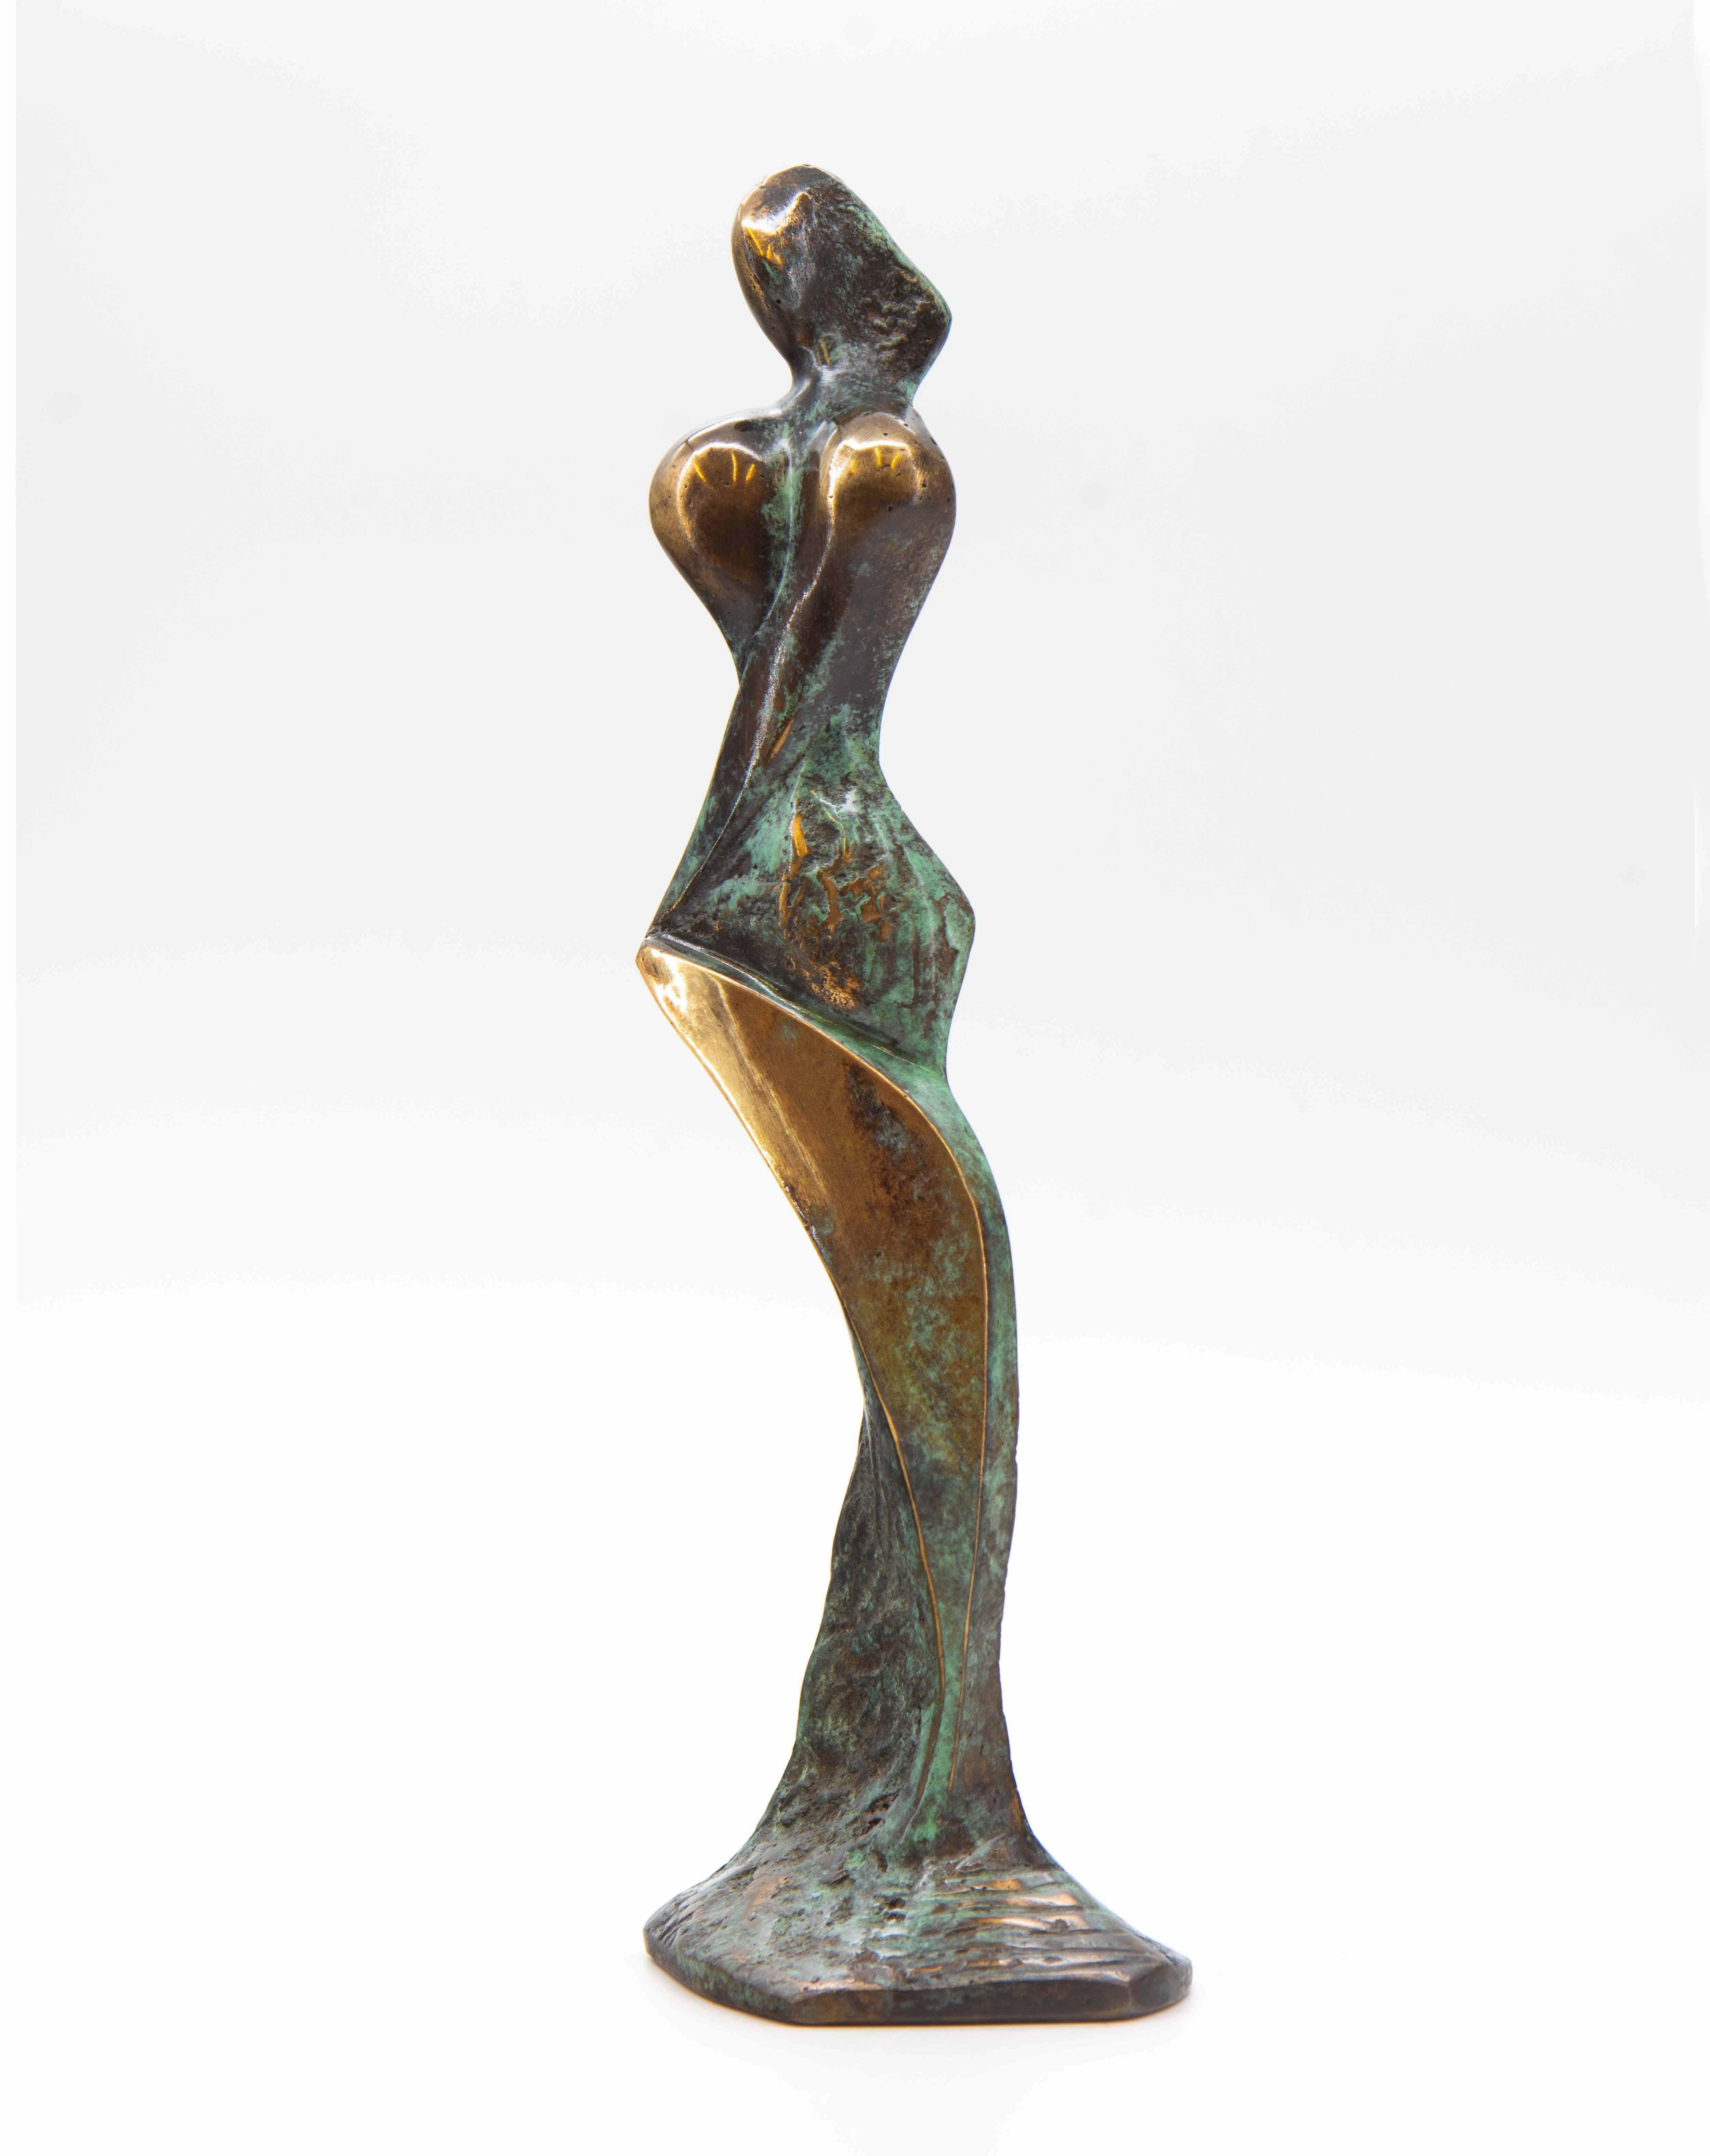 Contemporary Abstract Bronze of a Female Statuette by Stanislaw Wysocki For Sale 1